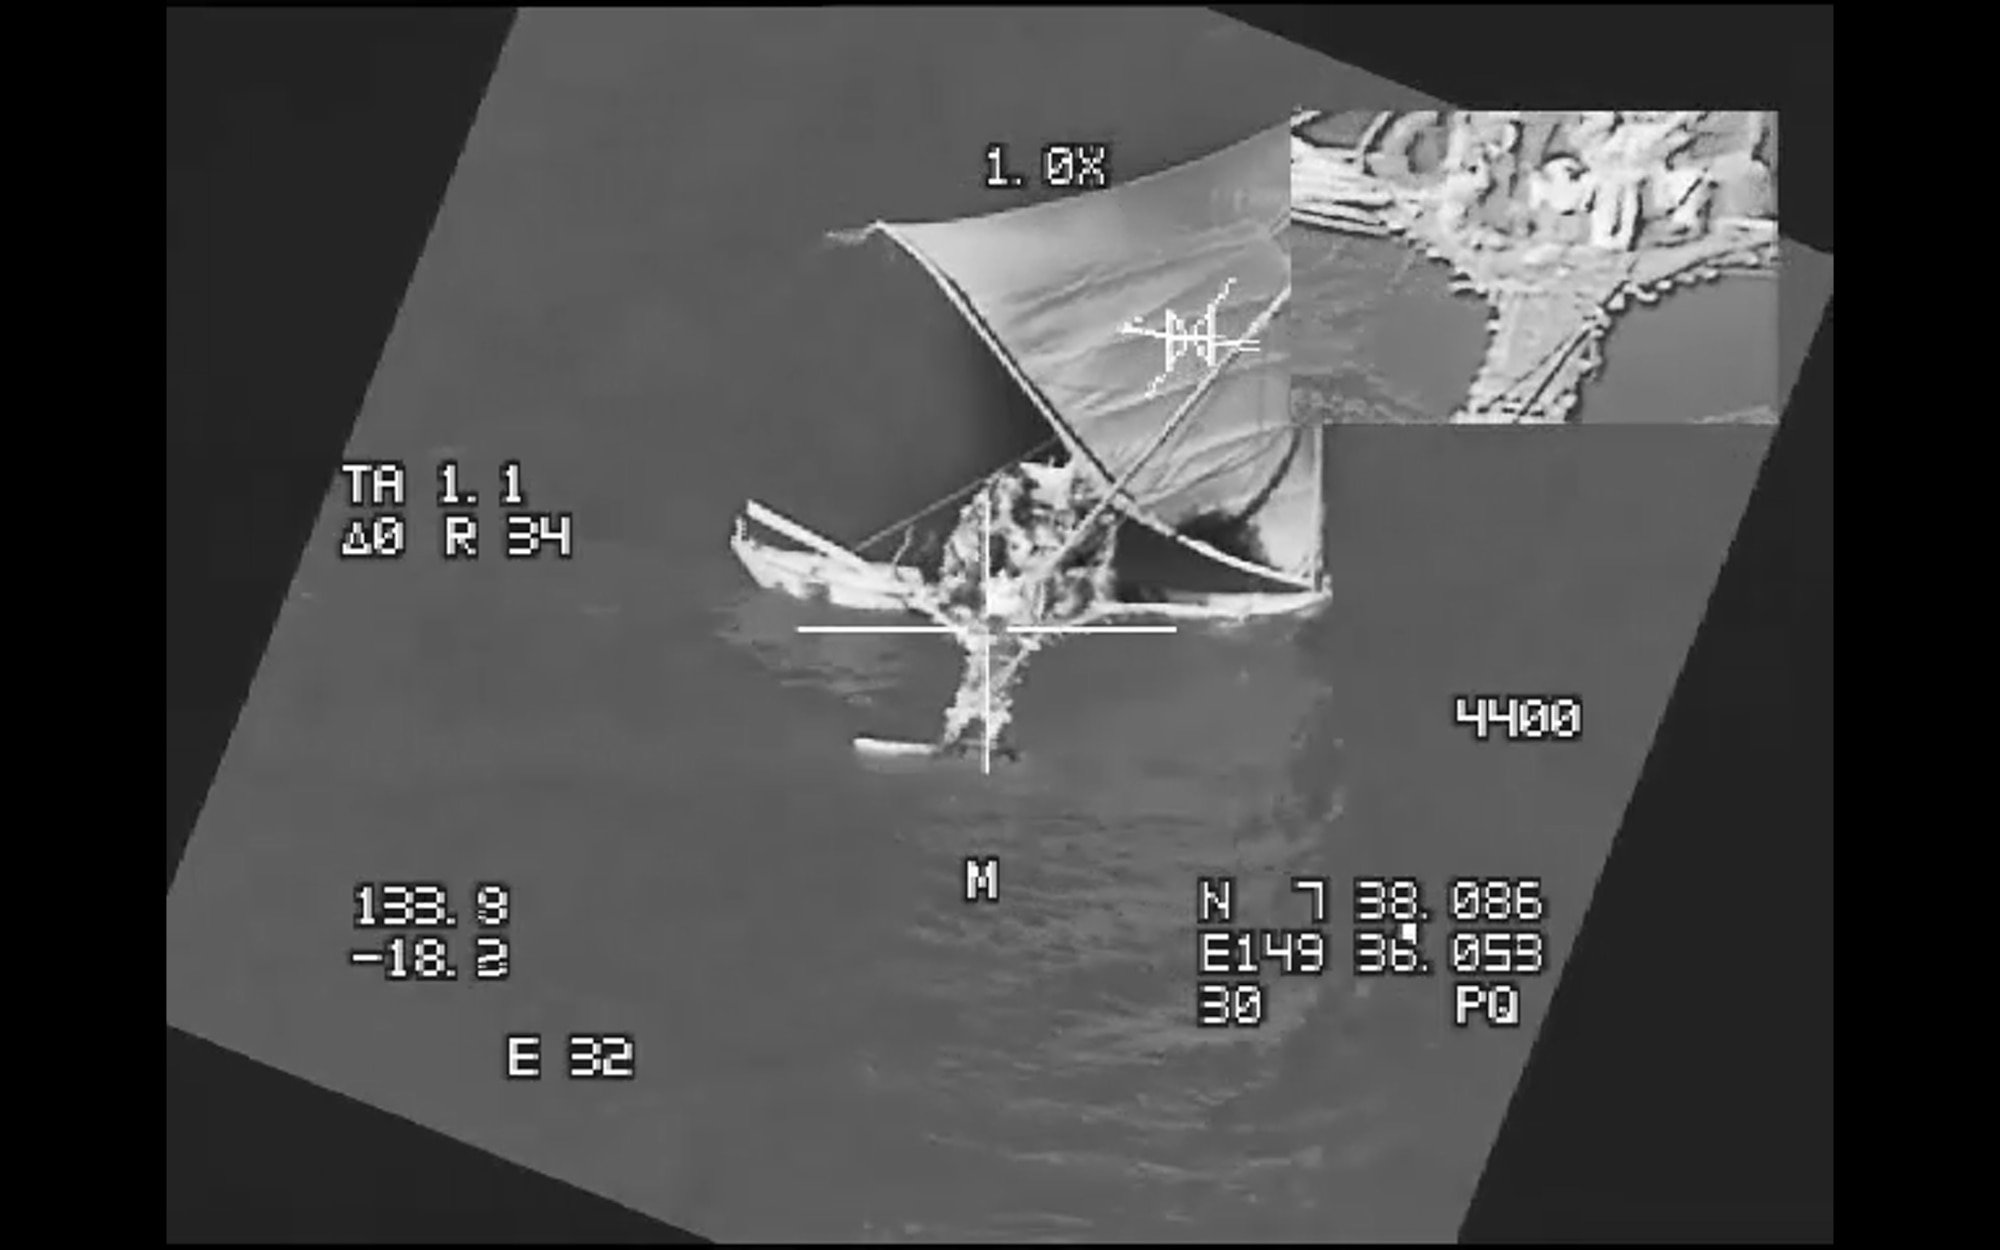 Six passengers aboard a canoe were located in a joint search and rescue mission June 25, 2018, in the Pacific Ocean Southwest of Guam. Crew members flying a B-52H Stratofortress assigned to the 20th Expeditionary Bomber Squadron (EBS), stationed at Barksdale Air Force Base (AFB), La., and deployed to Andersen AFB, Guam, successfully located six passengers who had been missing for six days and relayed their location to the U.S. Coast Guard. (courtesy photo)